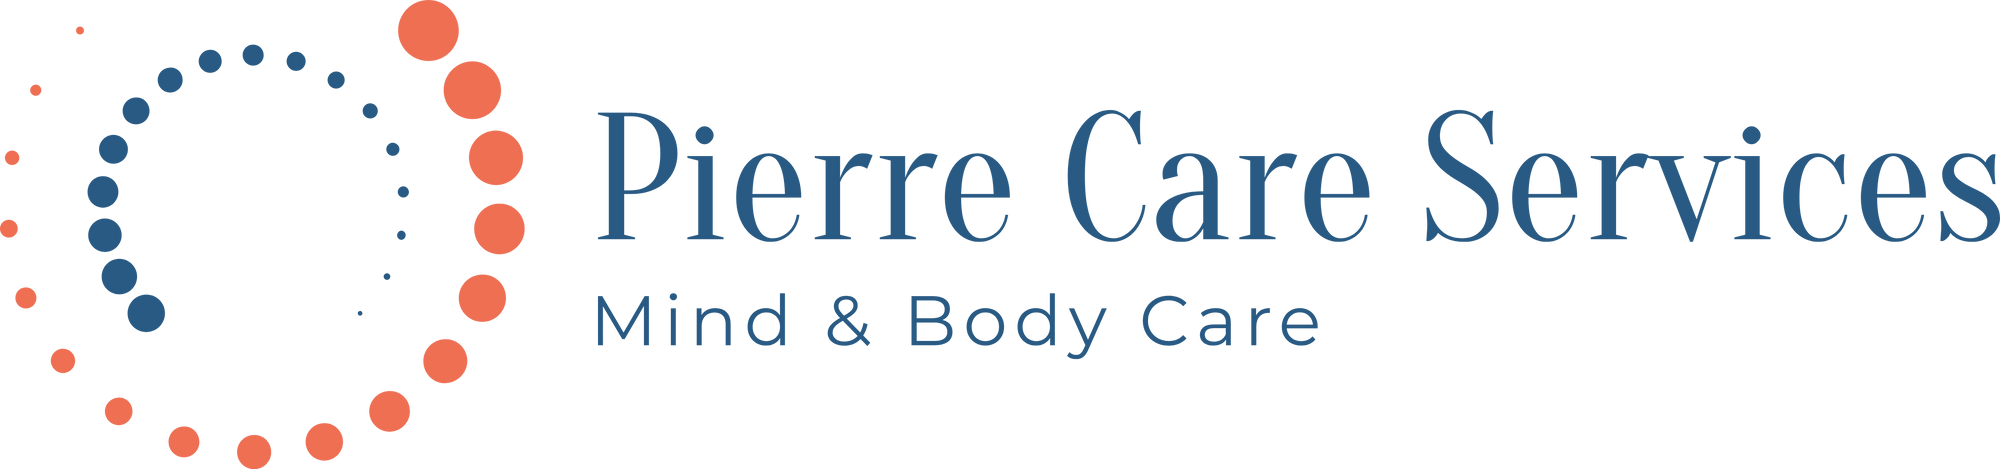 Welcome to Pierre Care Services. Our team is dedicated to providing quality care to the people of our community to benefit their health and well-being. 